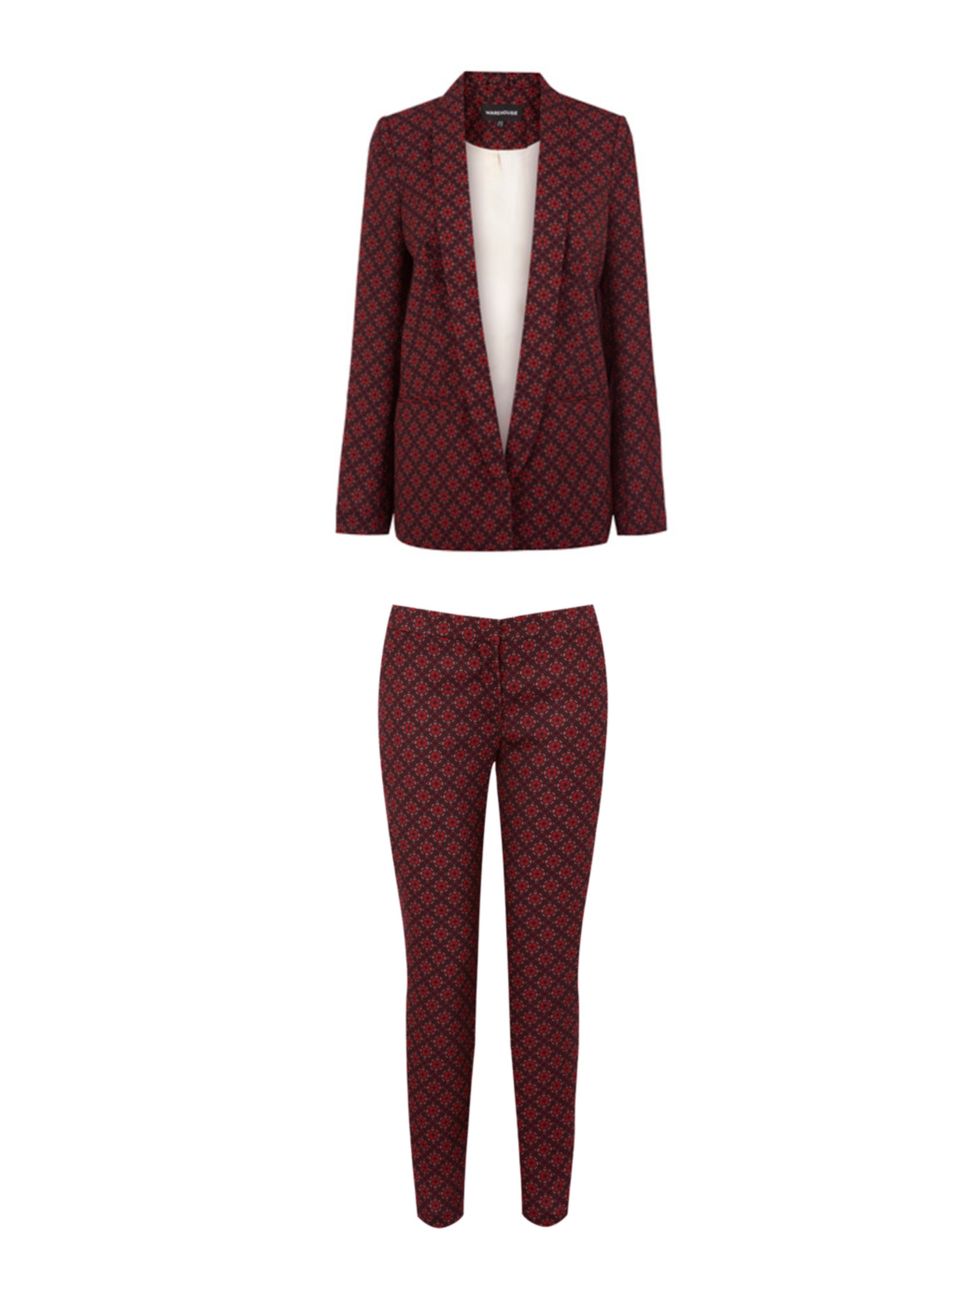 <p>THE TROUSER SUIT</p><p>Warehouse printed blazer, £70, and trousers, £45</p><p><a href="http://shopping.elleuk.com/browse?fts=warehouse+print+blazer">BUY NOW</a></p>